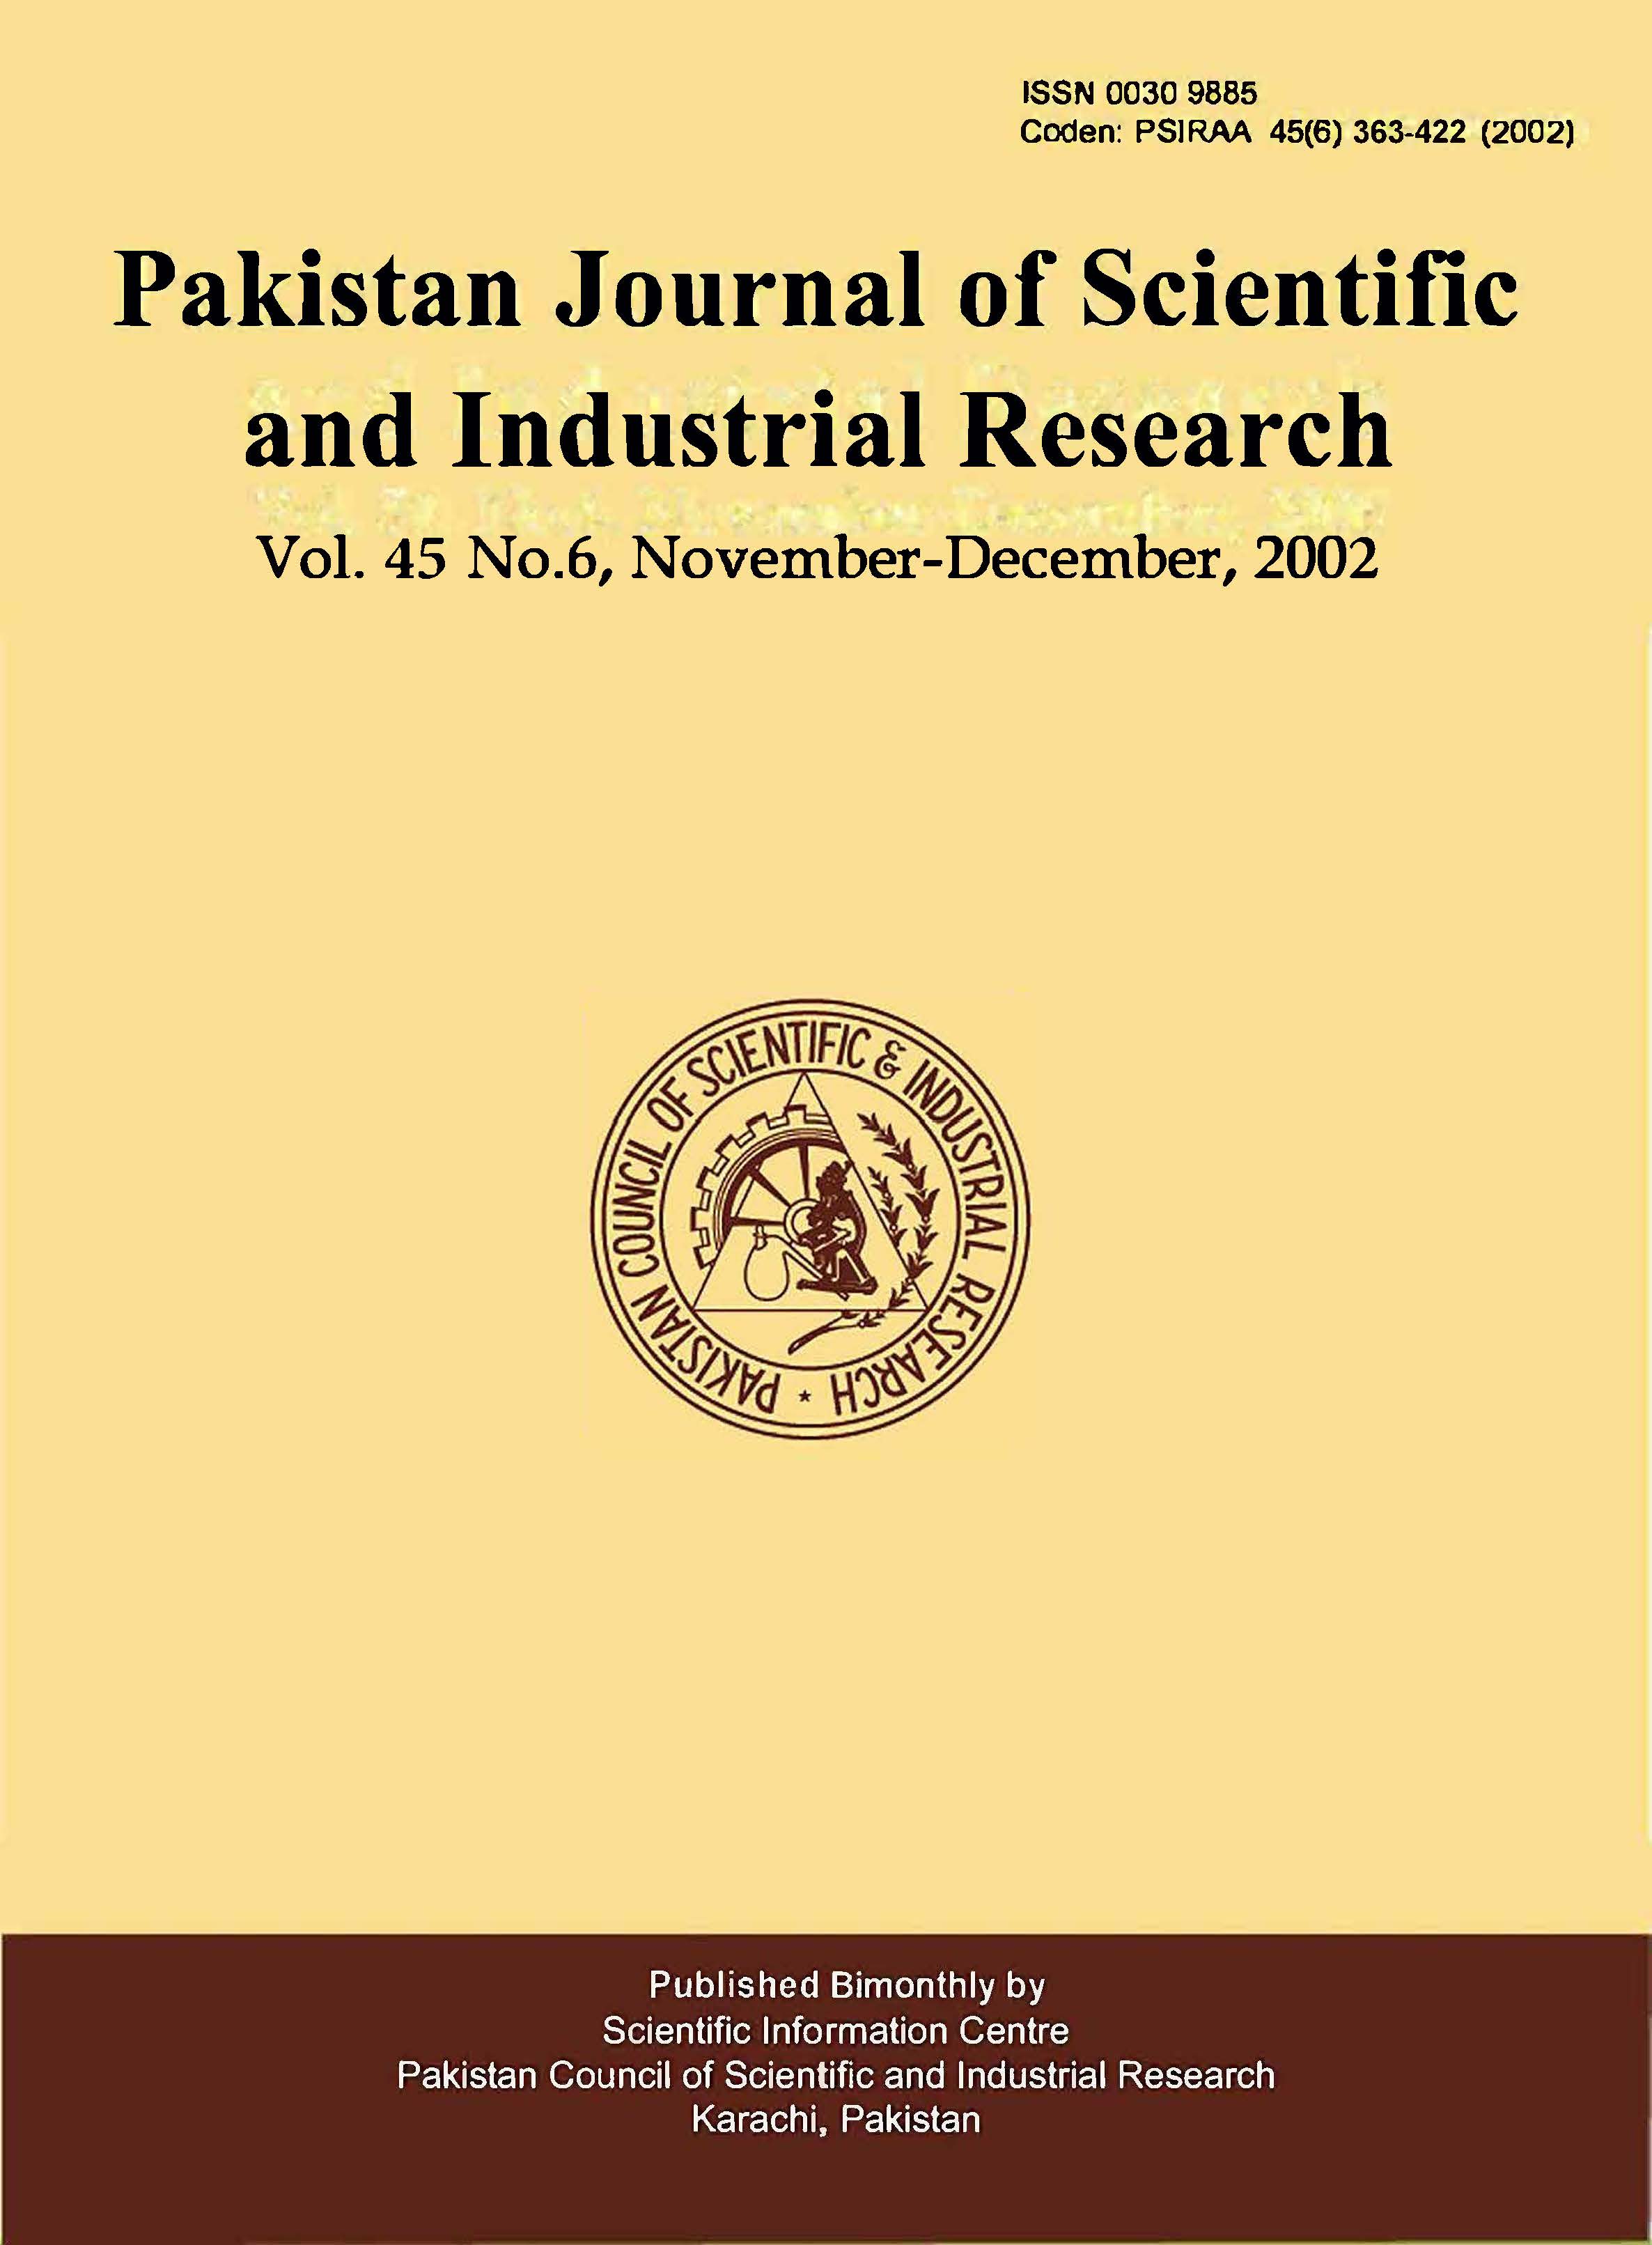 					View Vol. 45 No. 6 (2002): Pakistan Journal of Scientific and Industrial Research
				